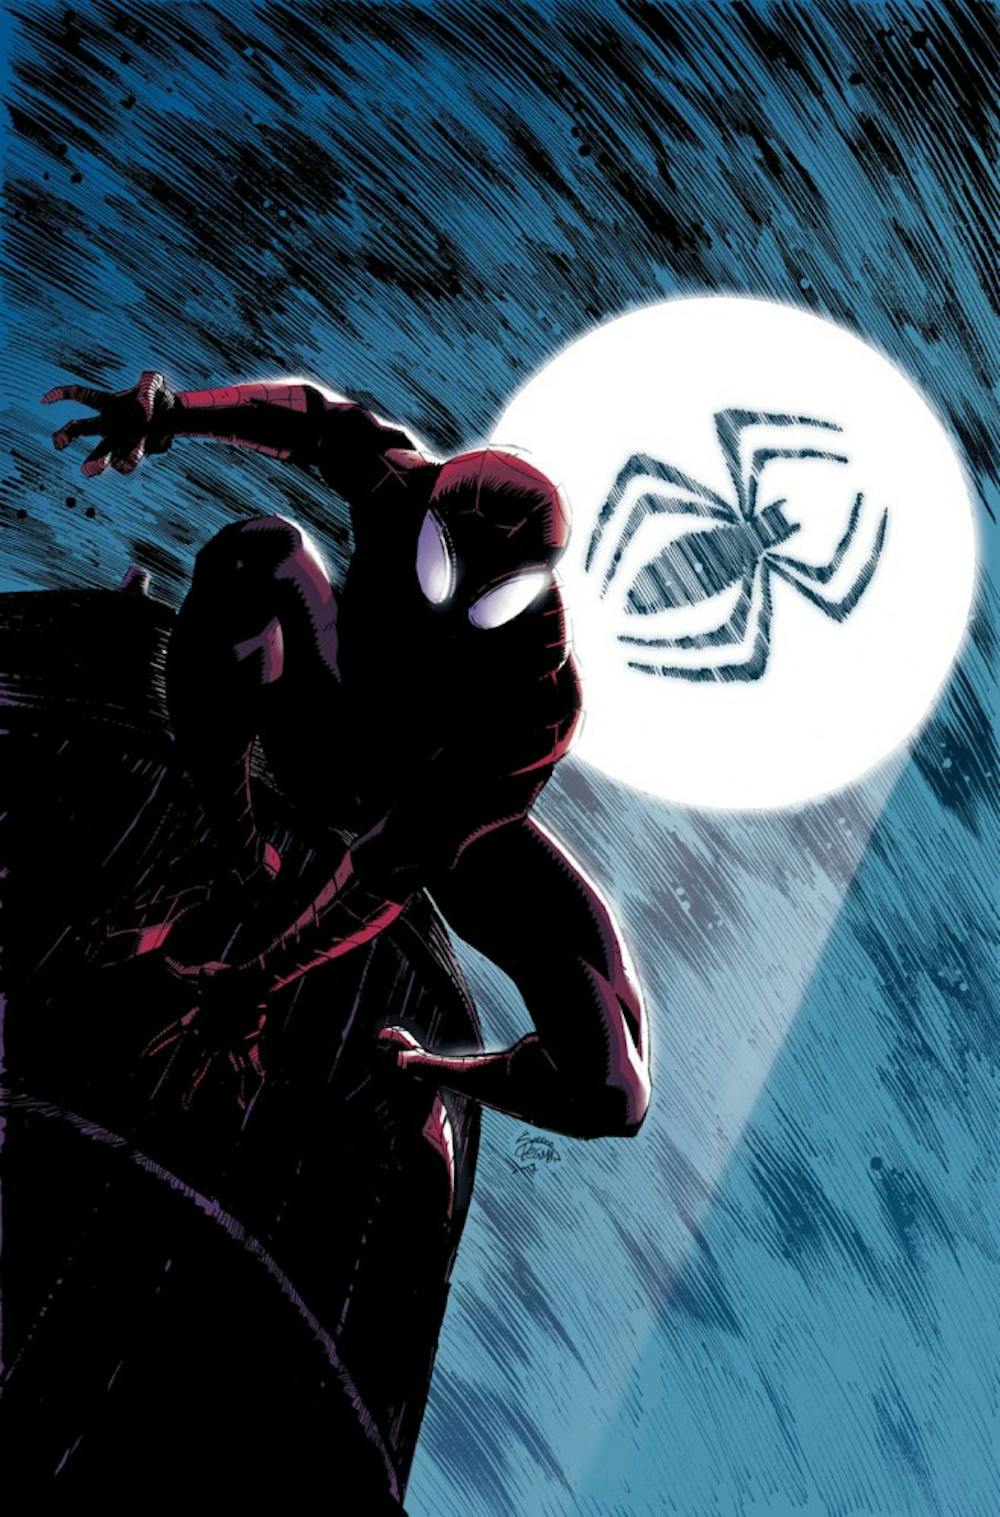 	<p><span class="caps">MSU</span> alumnus Ryan Stegman is illustrating a new Spider-man series featuring a reformed villain determined to do good. Illustration courtesy of Ryan Stegman.</p>